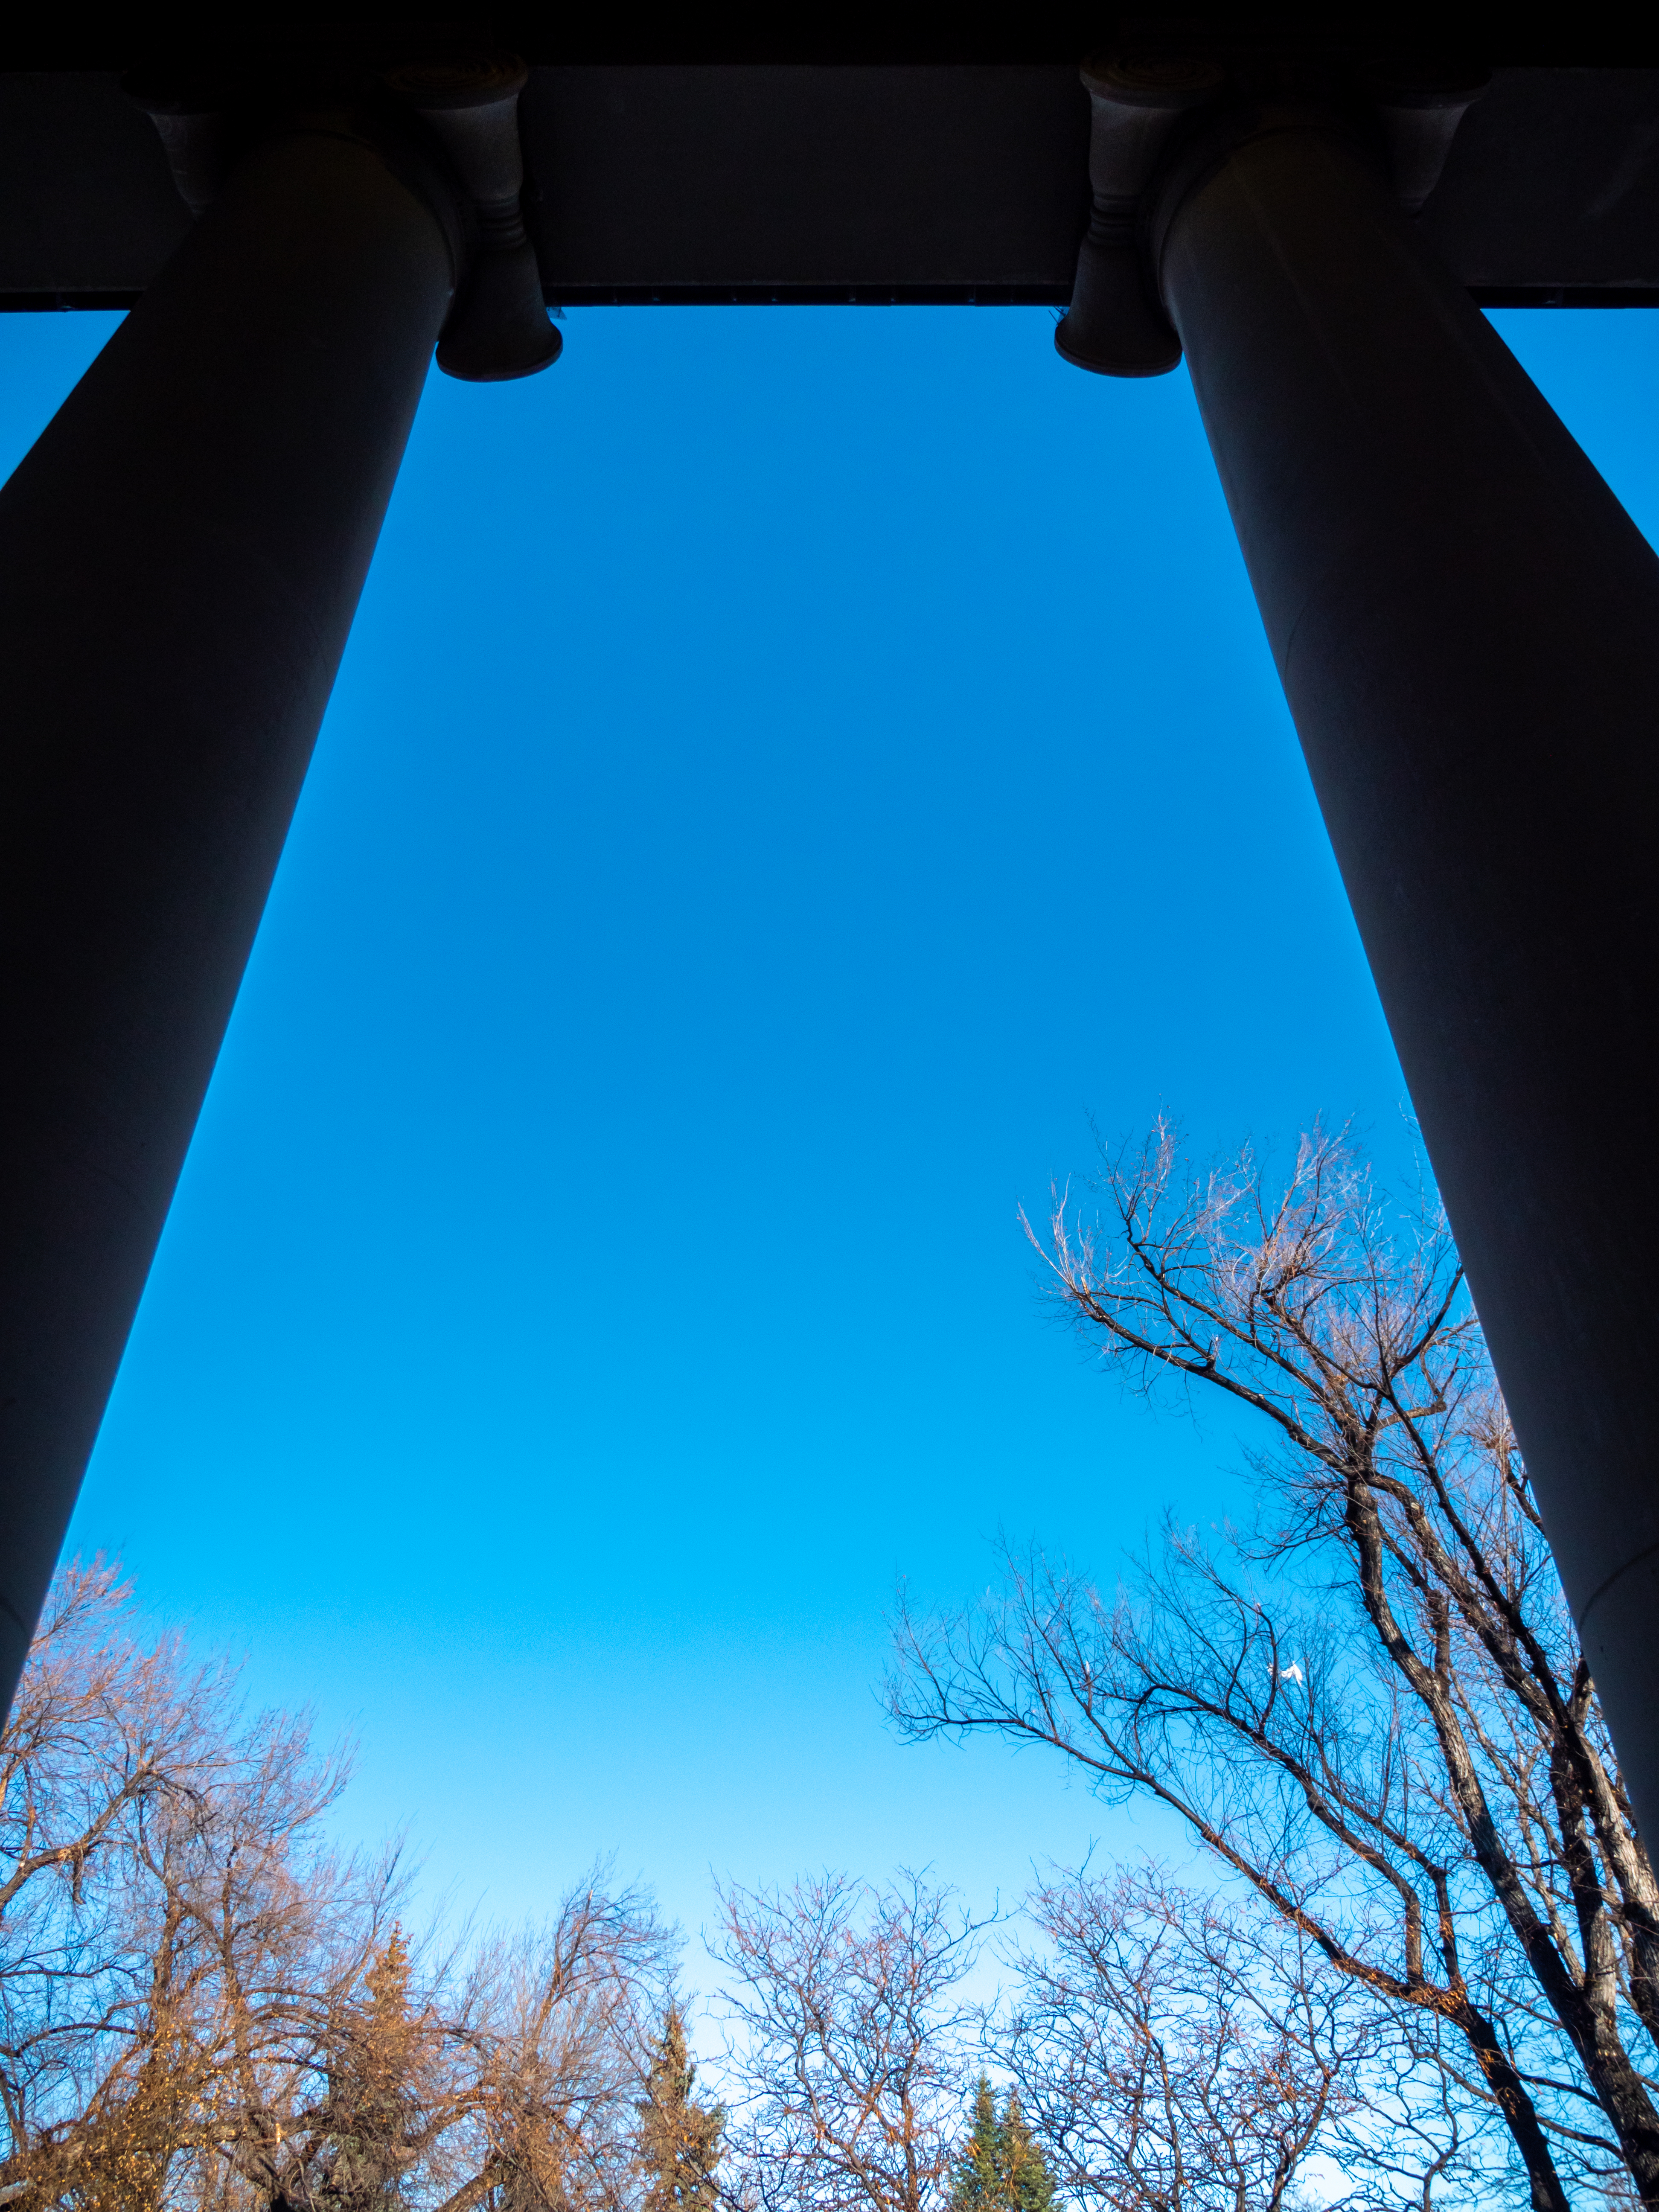 Pillars on the CU Boulder campus (Photo by  Patrick Campbell/University of Colorado)